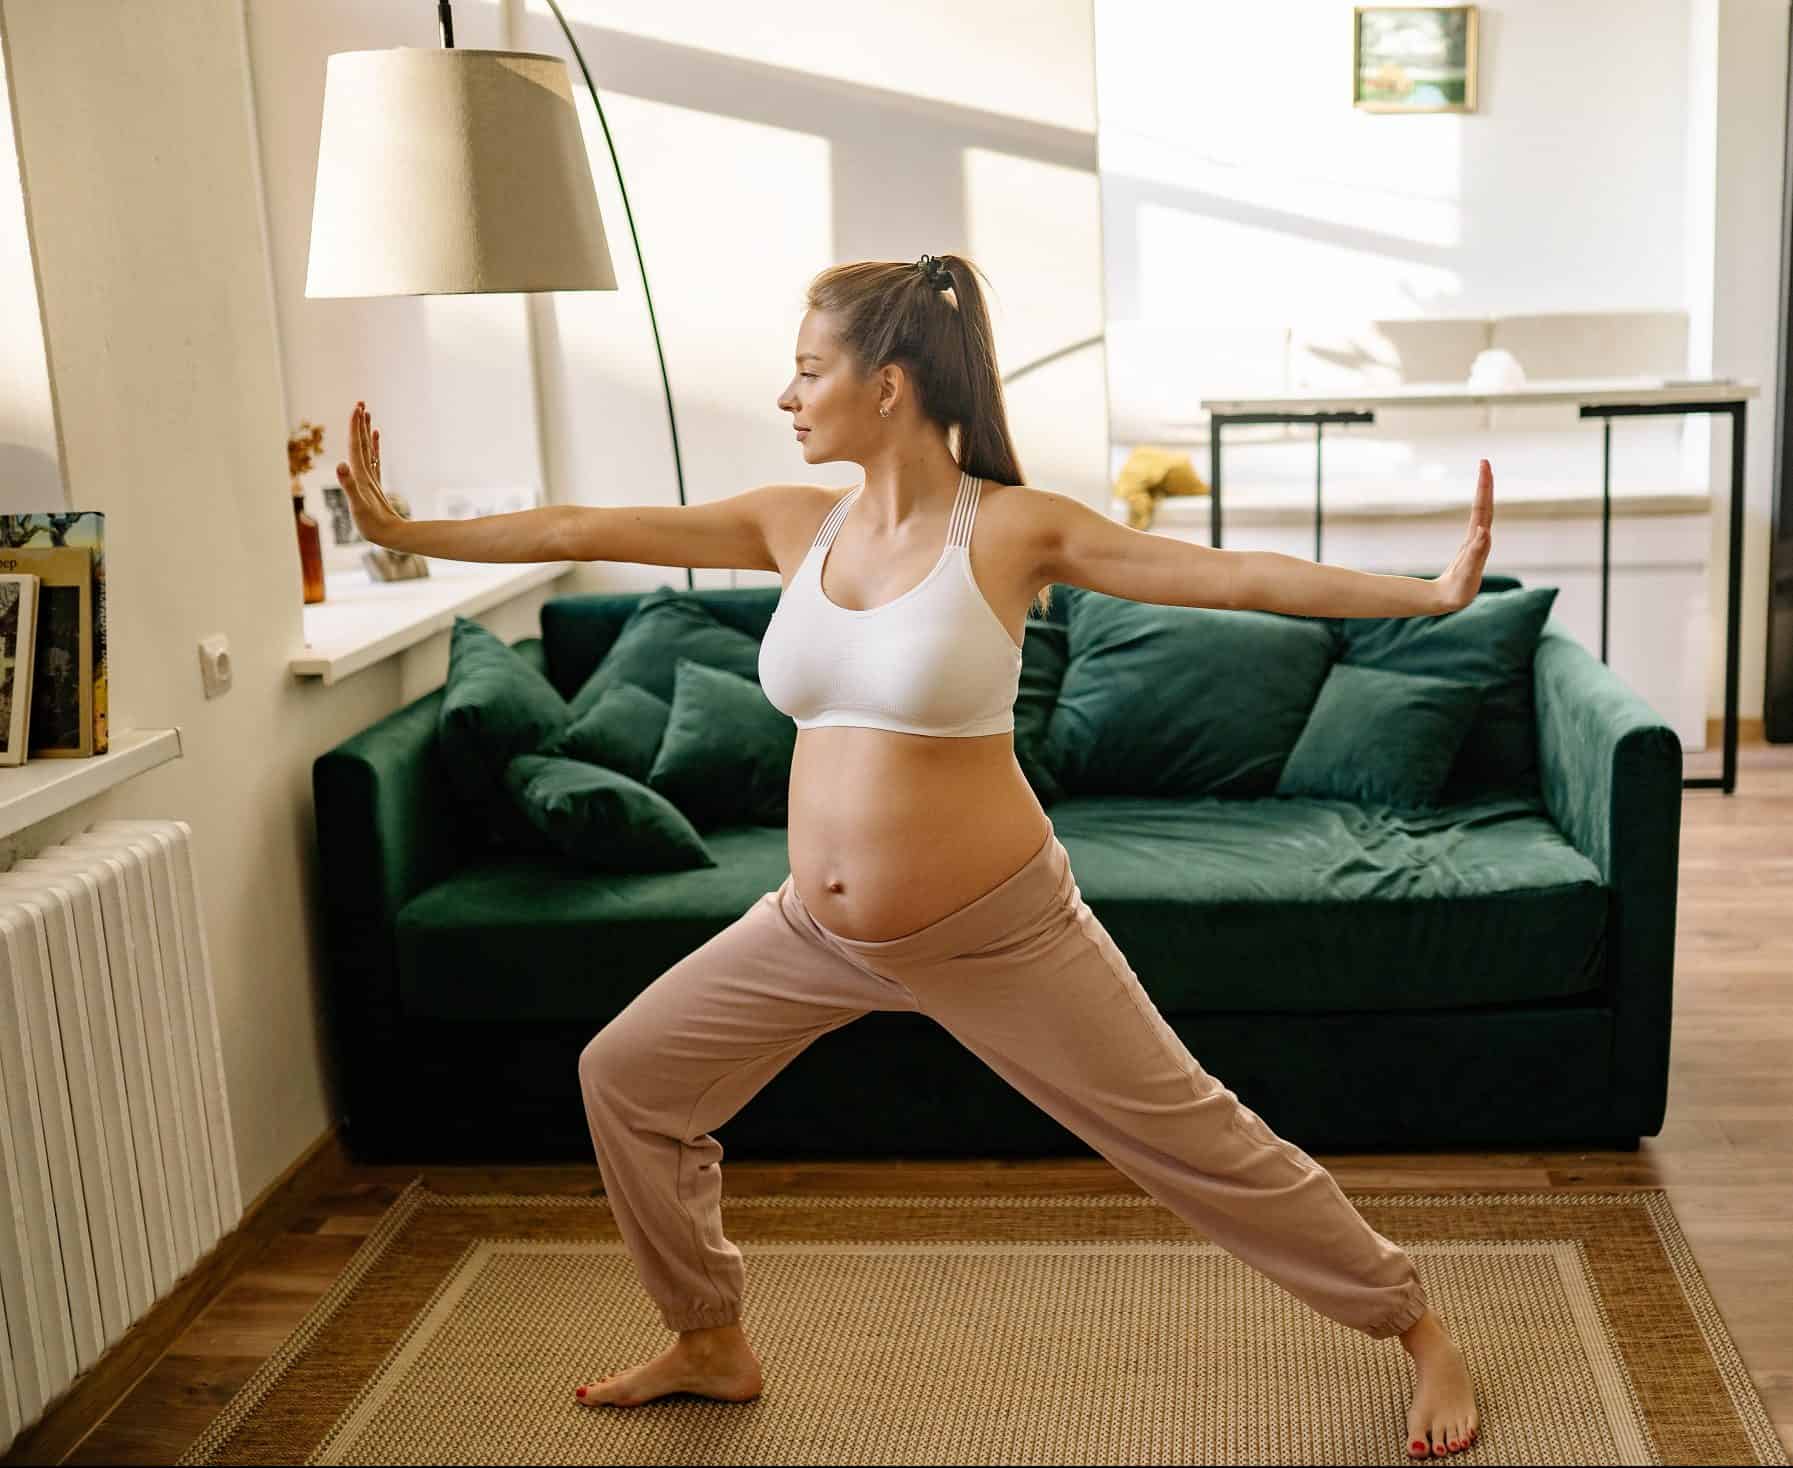 Does working out during pregnancy make childbirth easier?